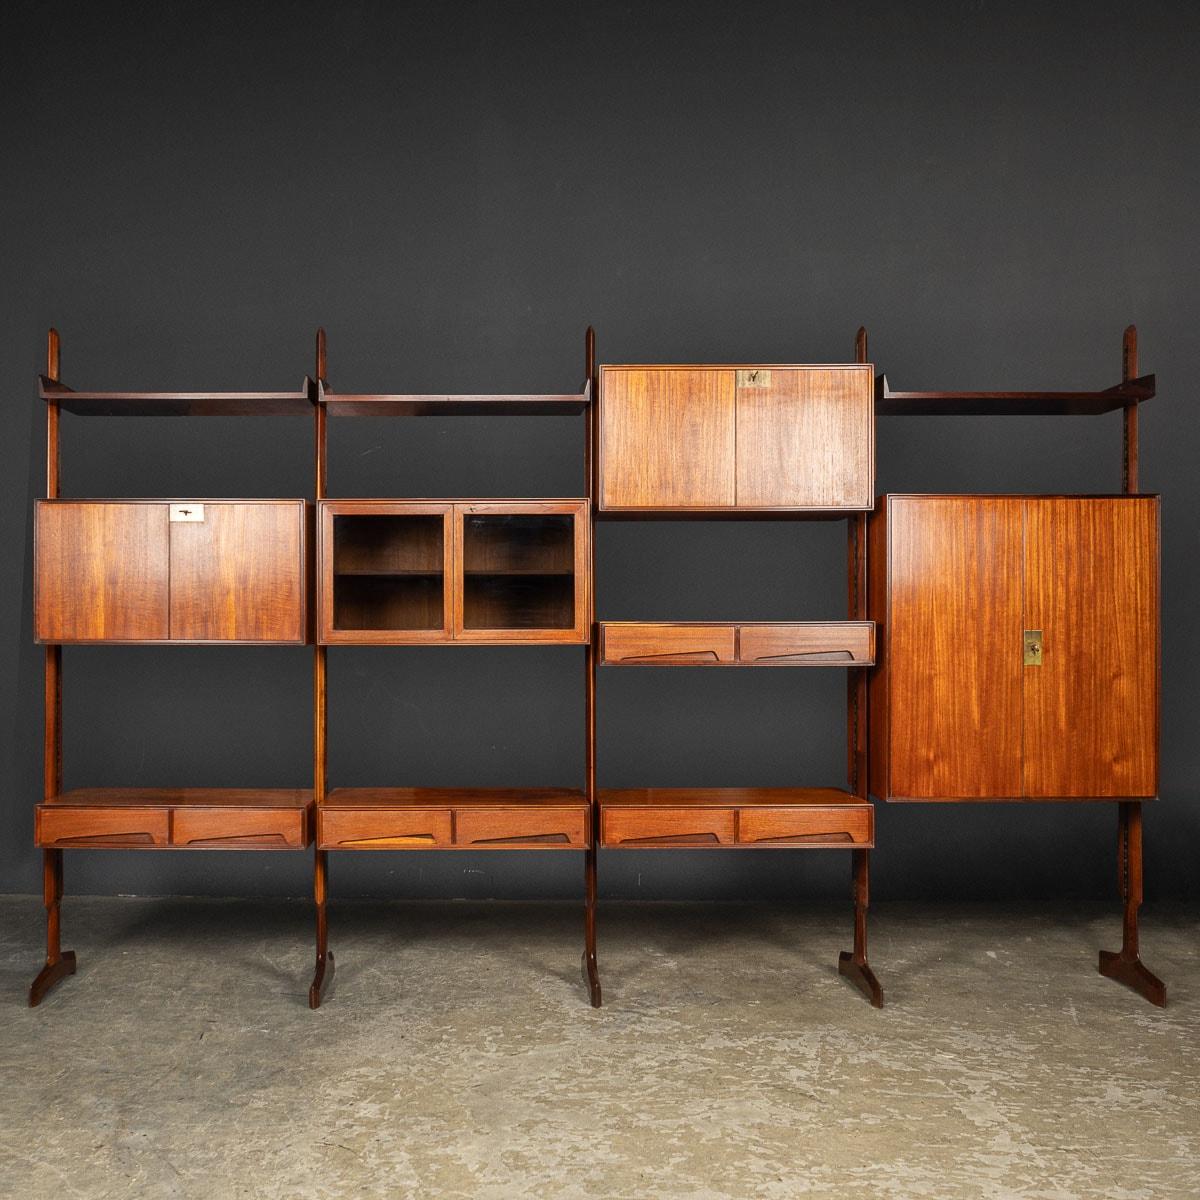 A rare versatile piece of mid 20th Century Italian furniture, this free standing wall unit can also be used as a room divider. Designed by and manufactured by Vittorio Dassi, this classic unit features a range of shelves, drawers and locking